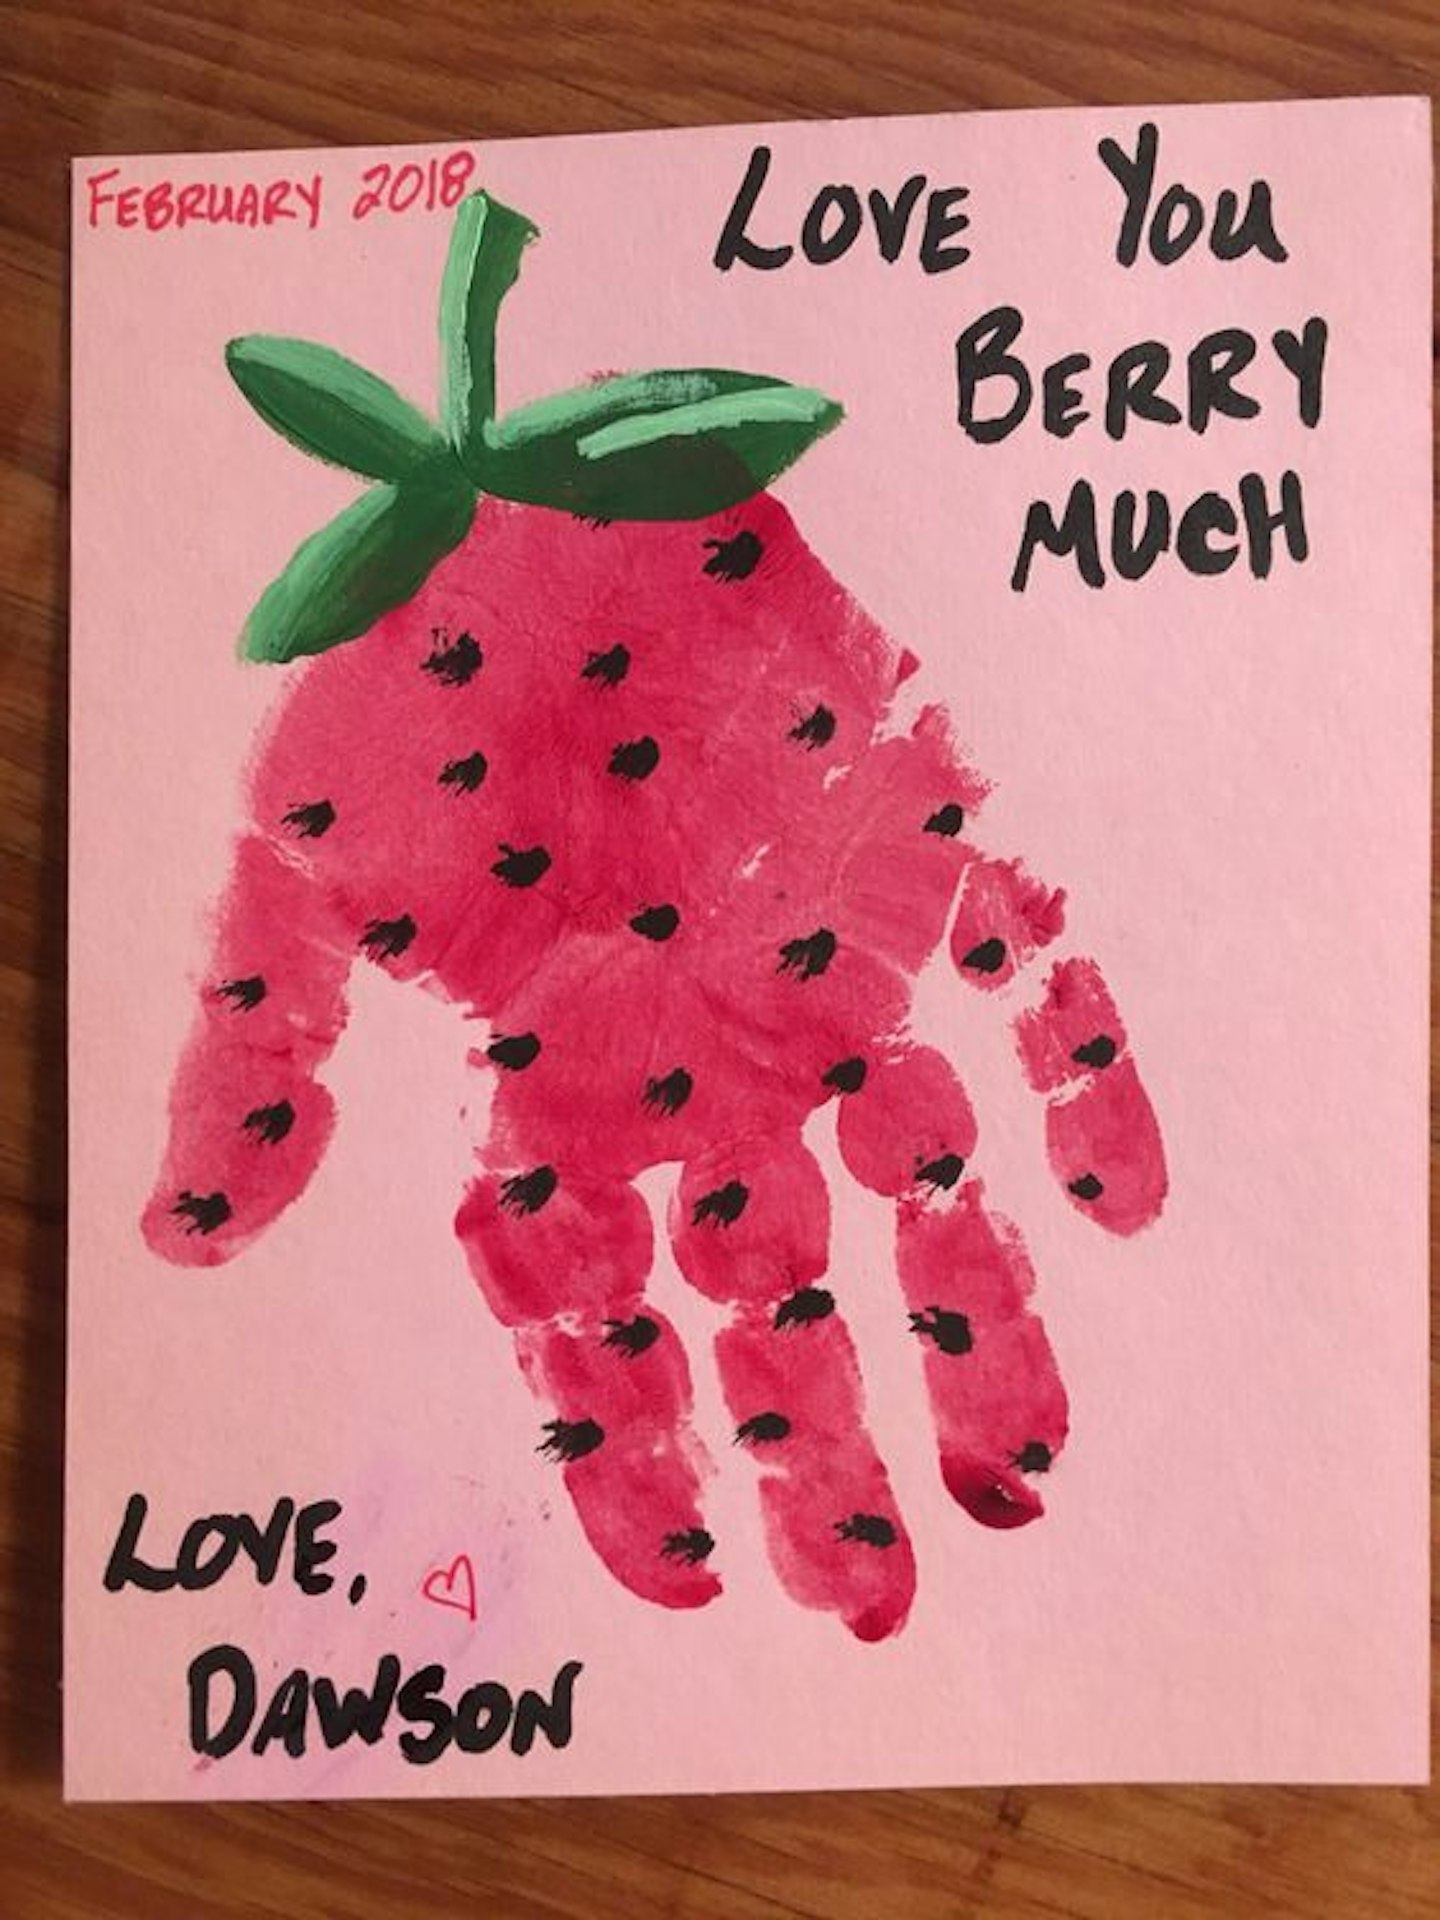 Berry much card